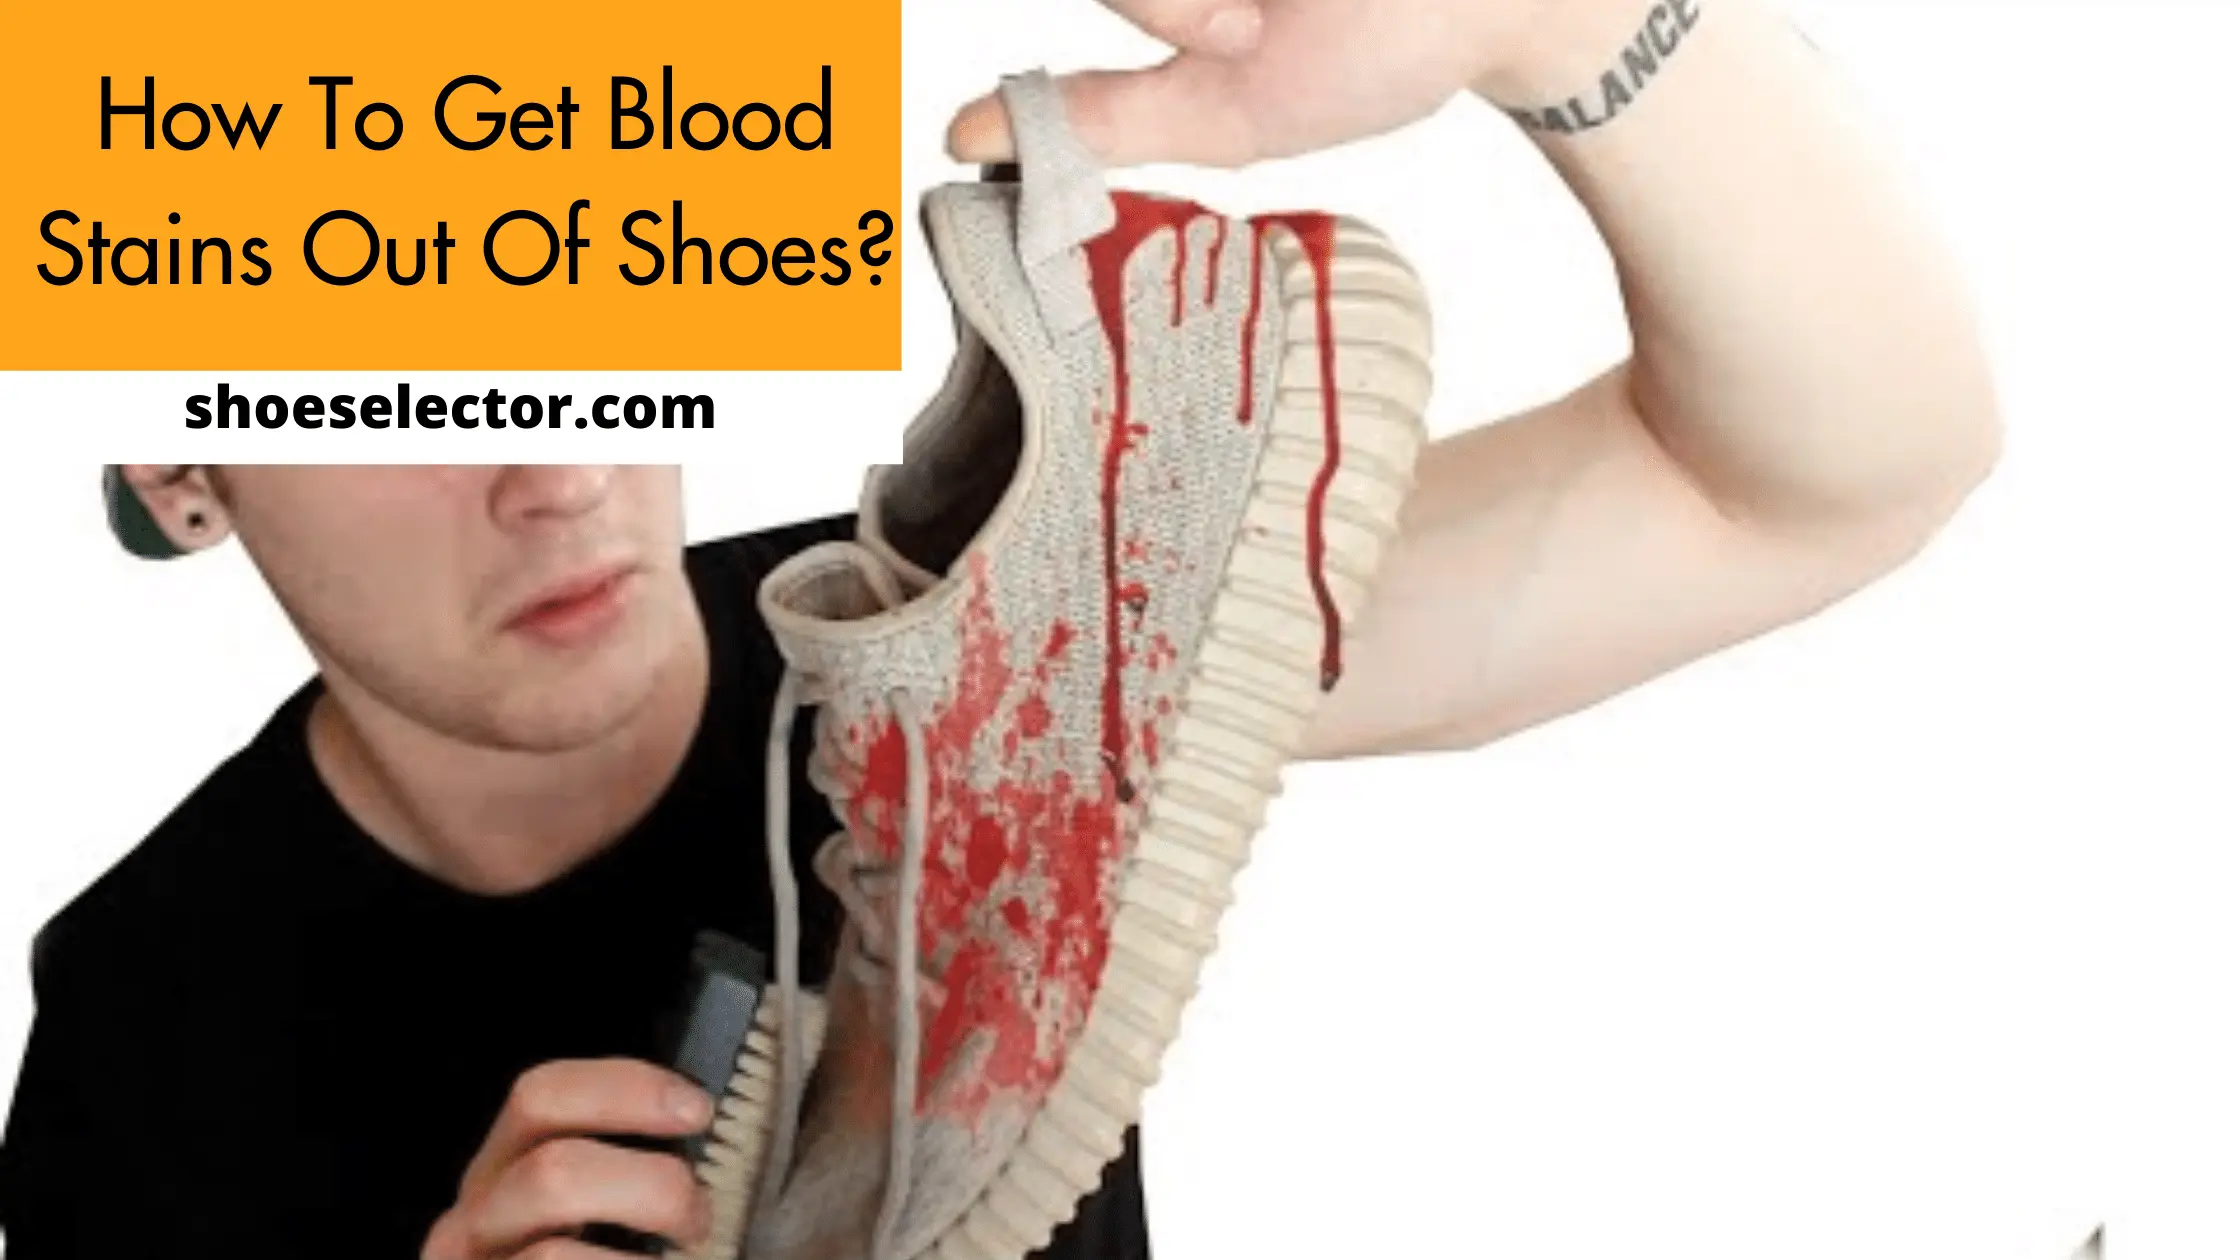 How to Get Blood Stains Out of Shoes? Pro Guide